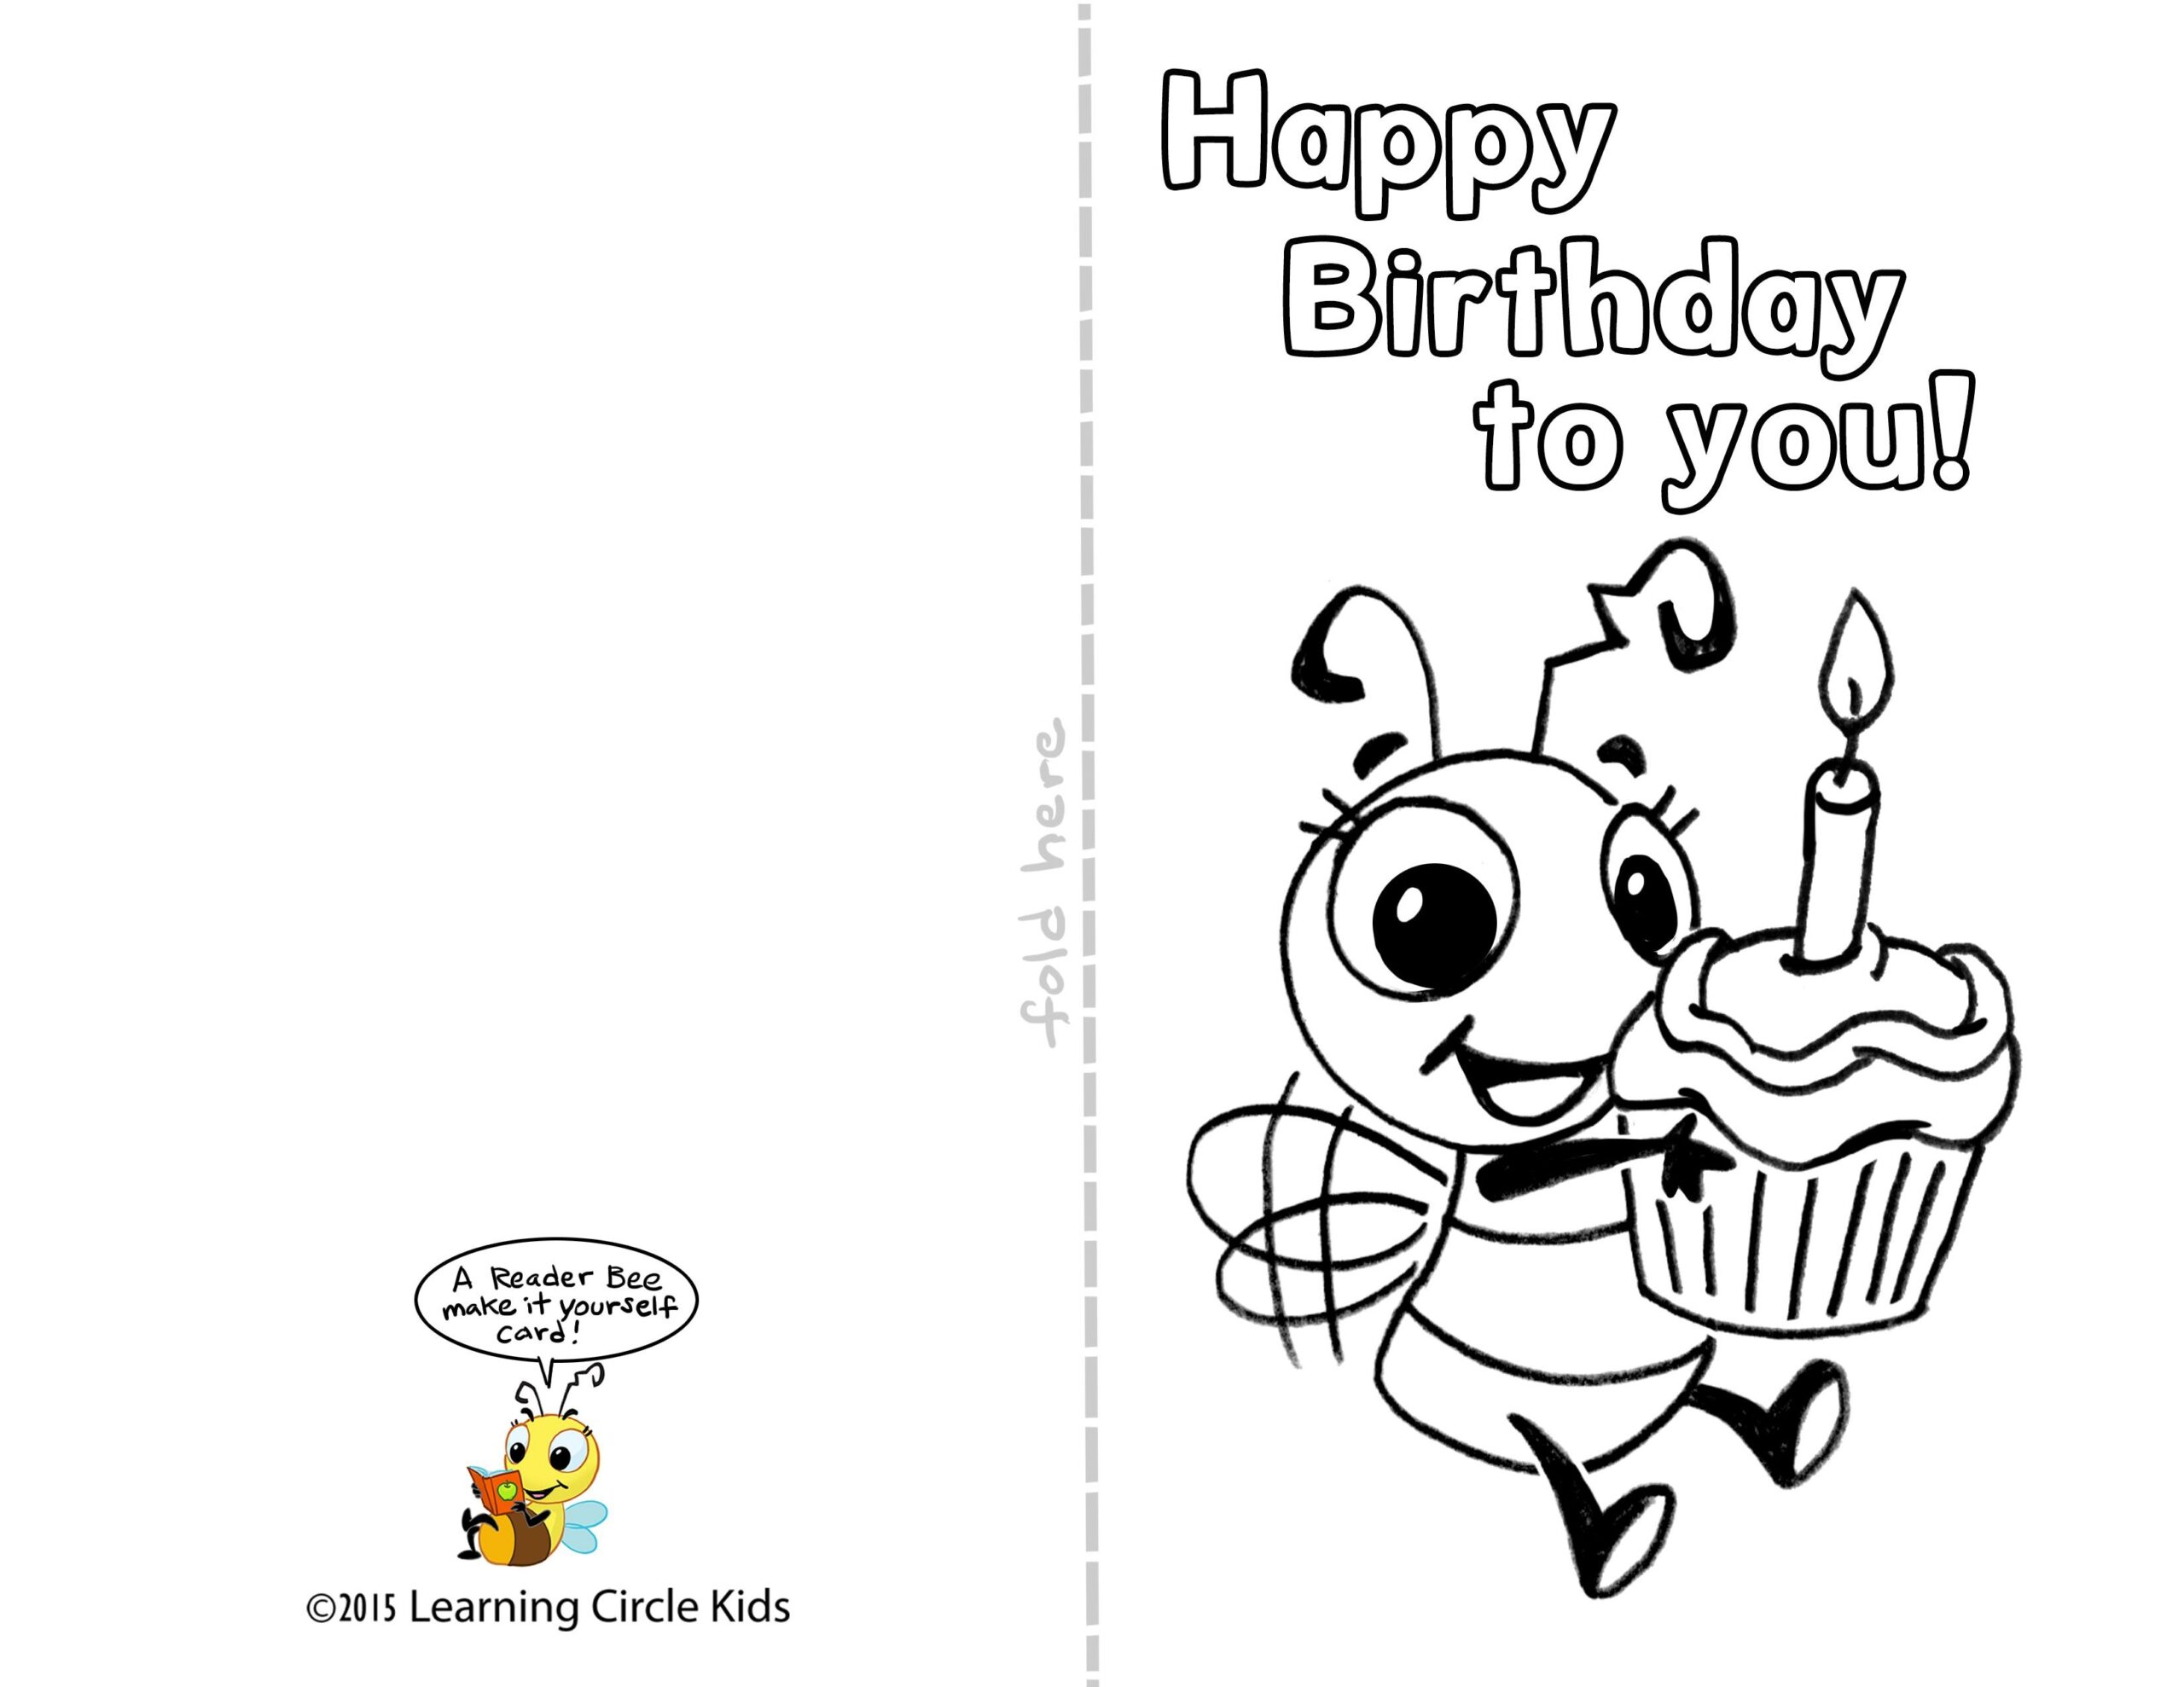 DIY Free Printable Birthday Card For Kids To Decorate And Write Their Own Coloring Birthday Cards Free Printable Birthday Cards Happy Birthday Cards Printable - Free Printable Birthday Cards For Kids